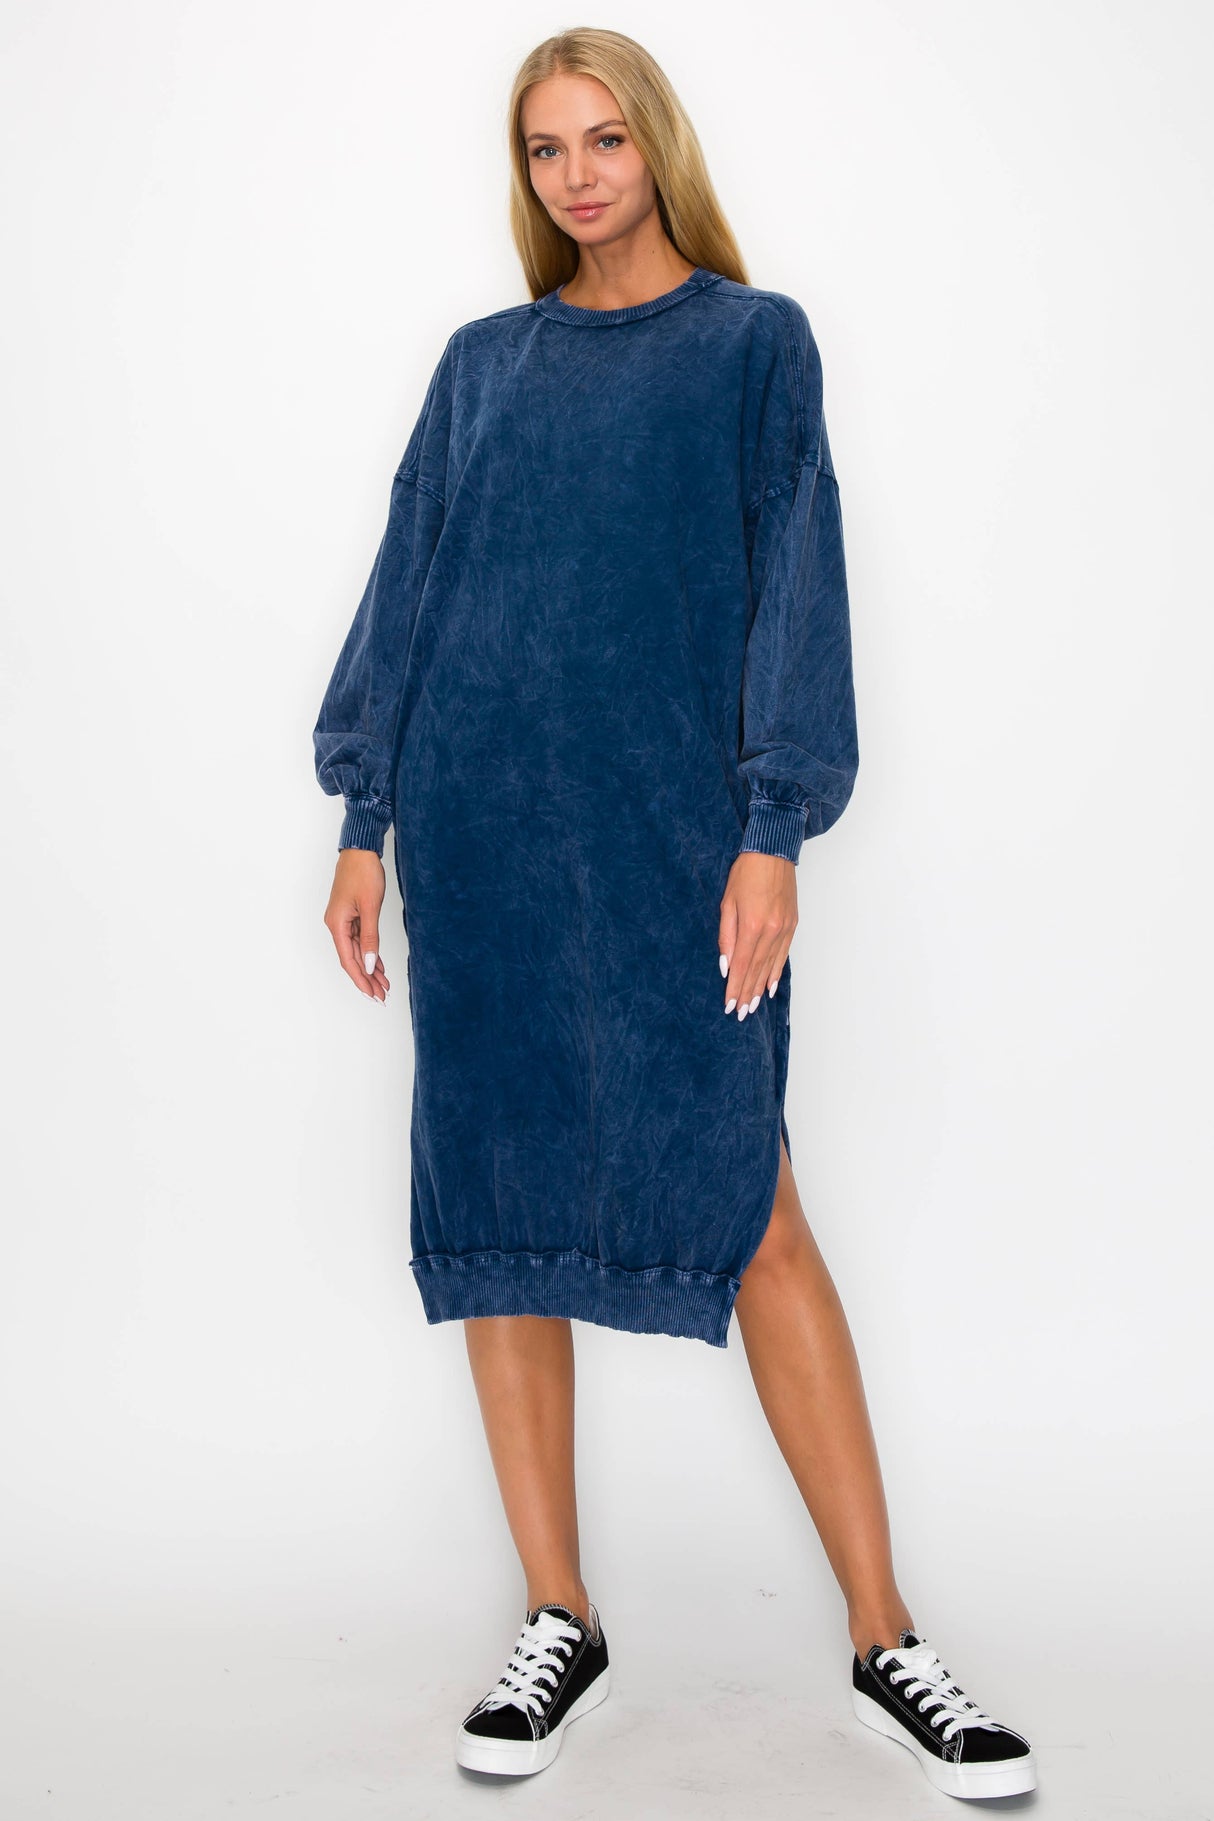 Mineral Wash Terry Comfy dress